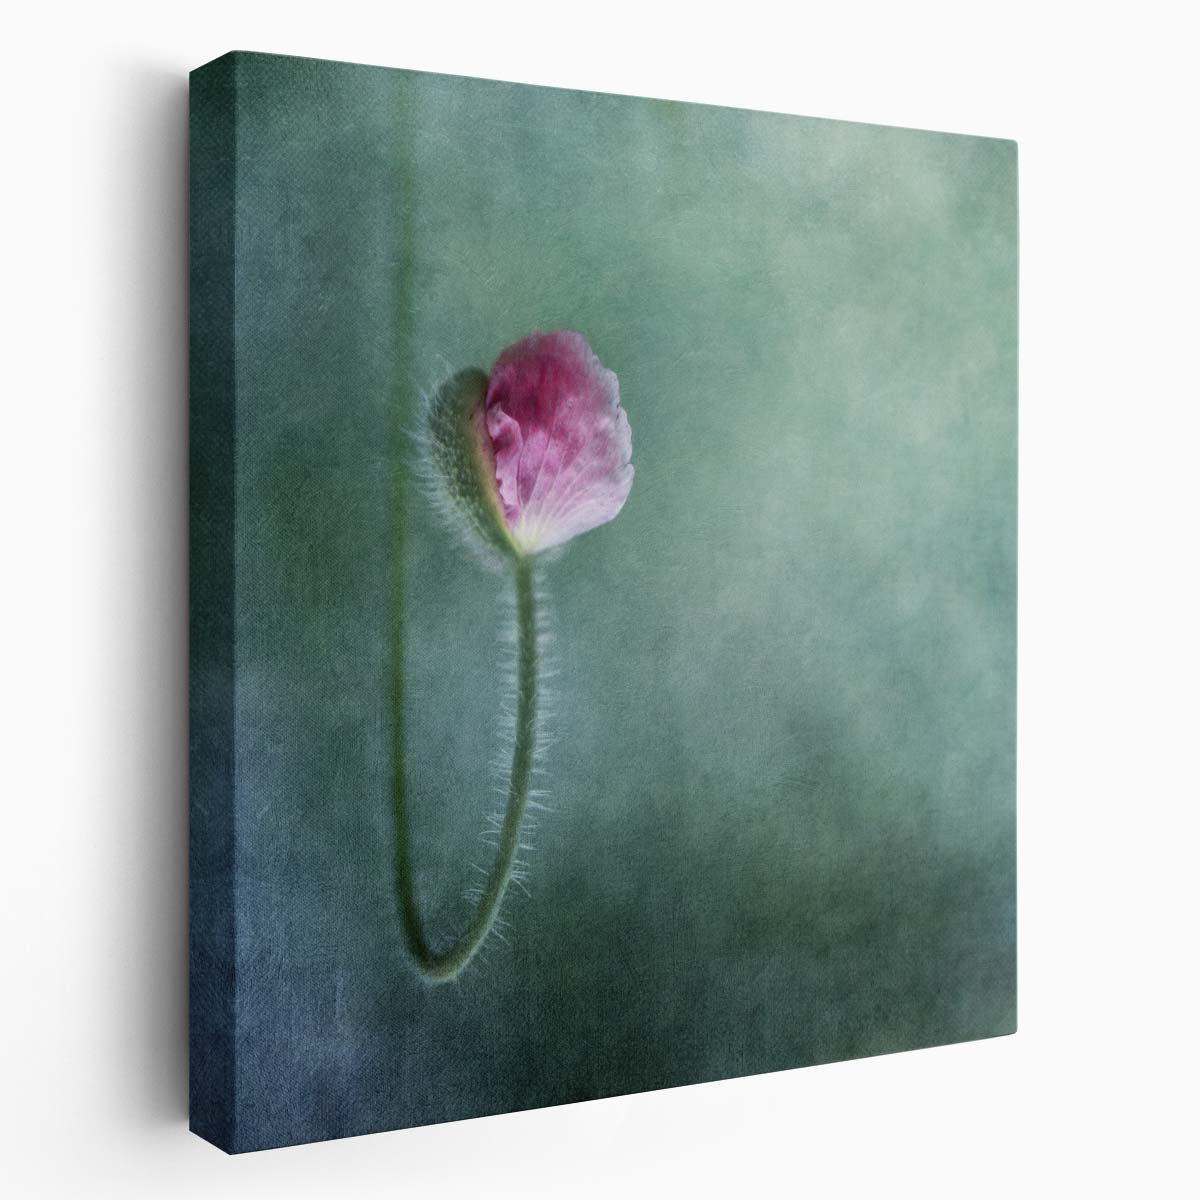 Springtime Romance Blooming Tulip Duo in Macro Blossom Wall Art by Luxuriance Designs. Made in USA.